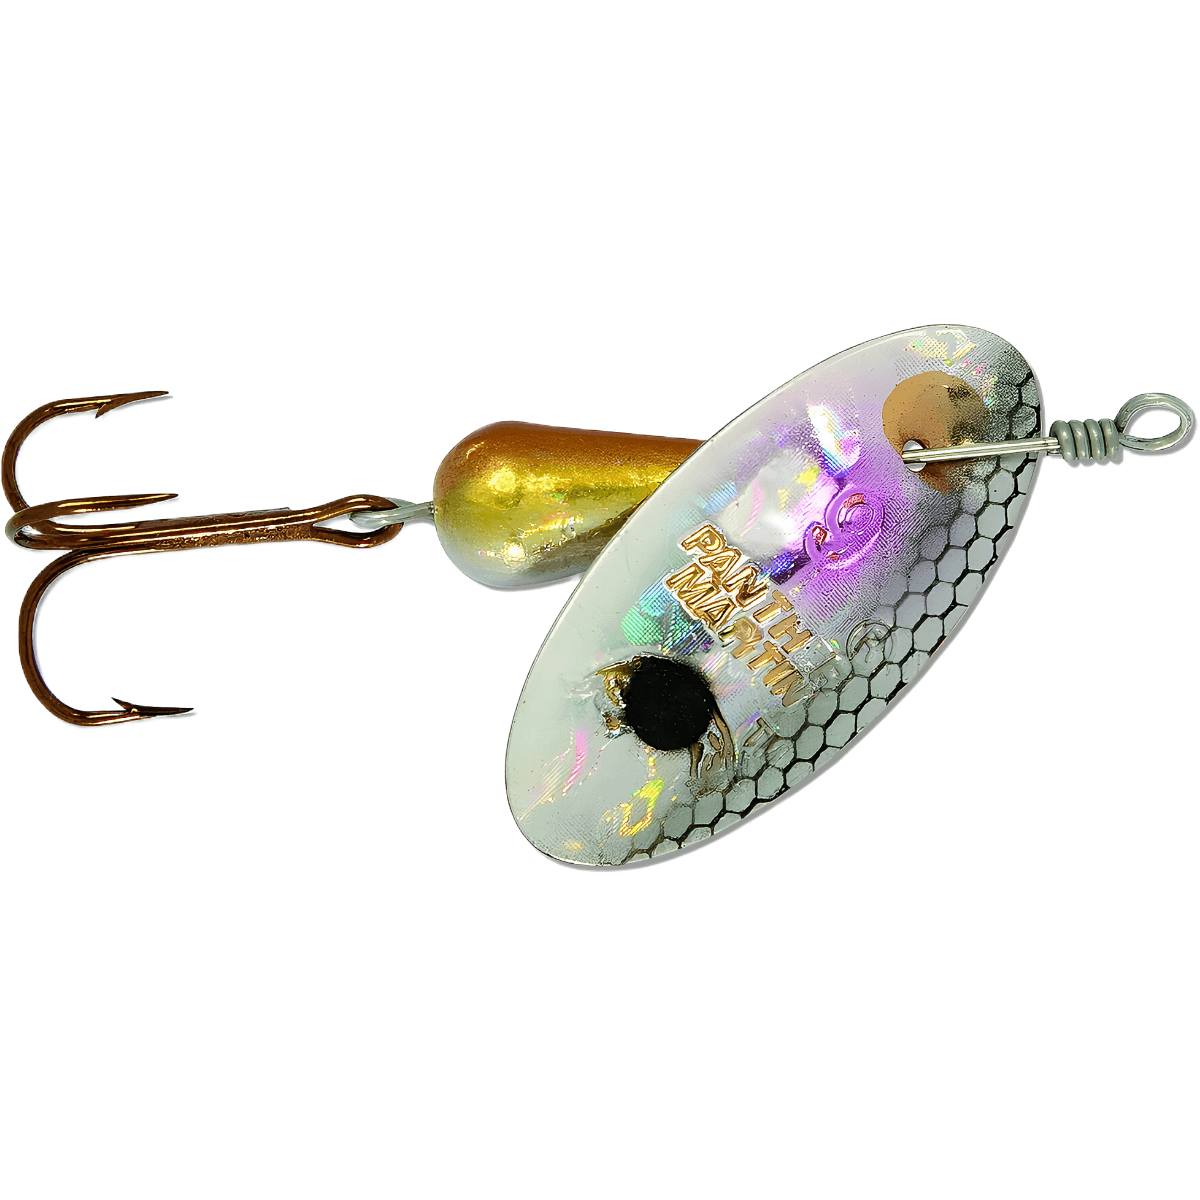 Panther Martin Holographic Spinner, Silver & Gold